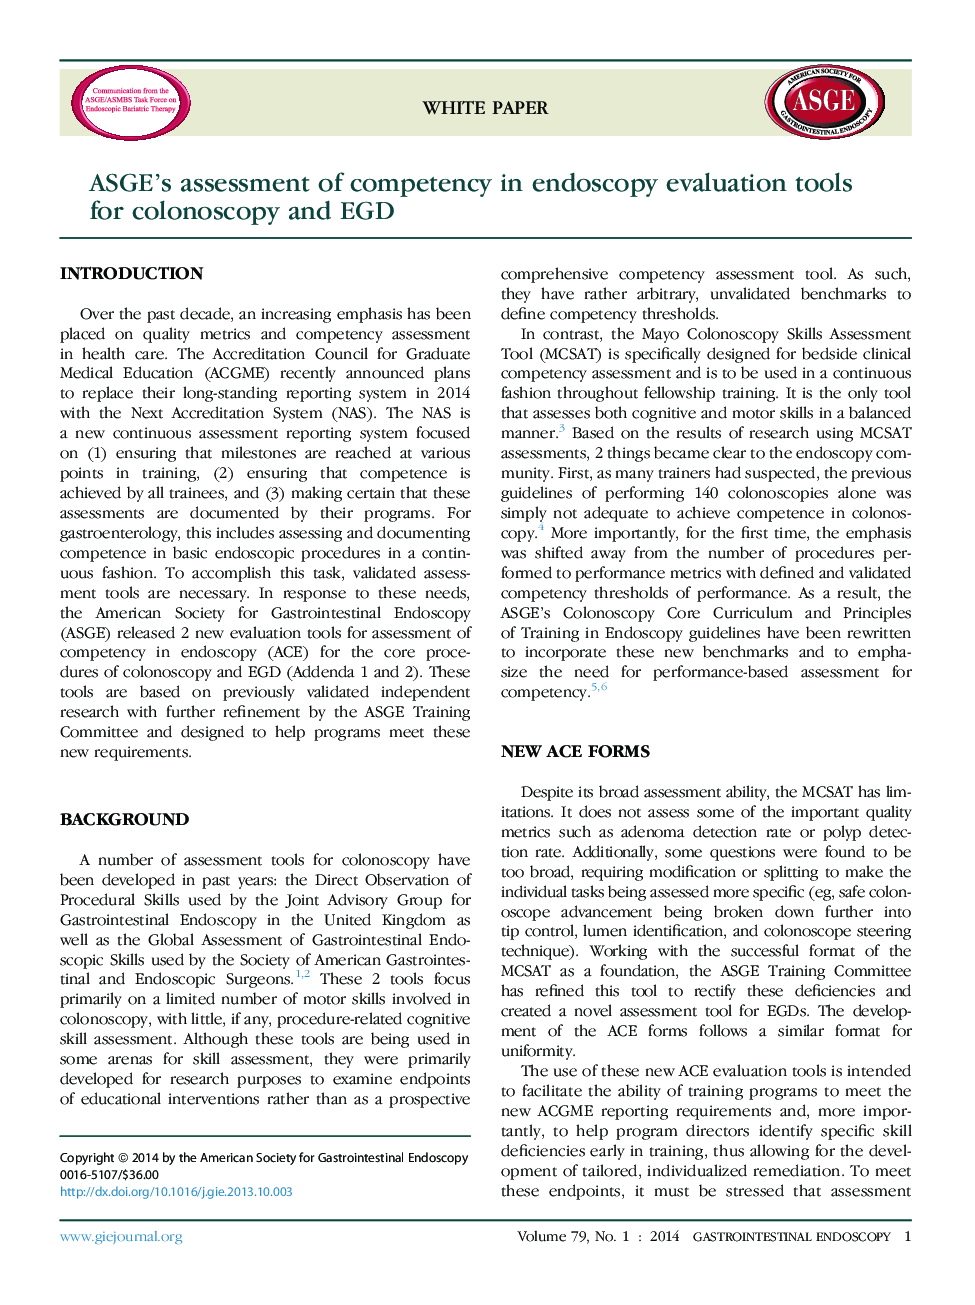 ASGE's assessment of competency in endoscopy evaluation tools for colonoscopy and EGD